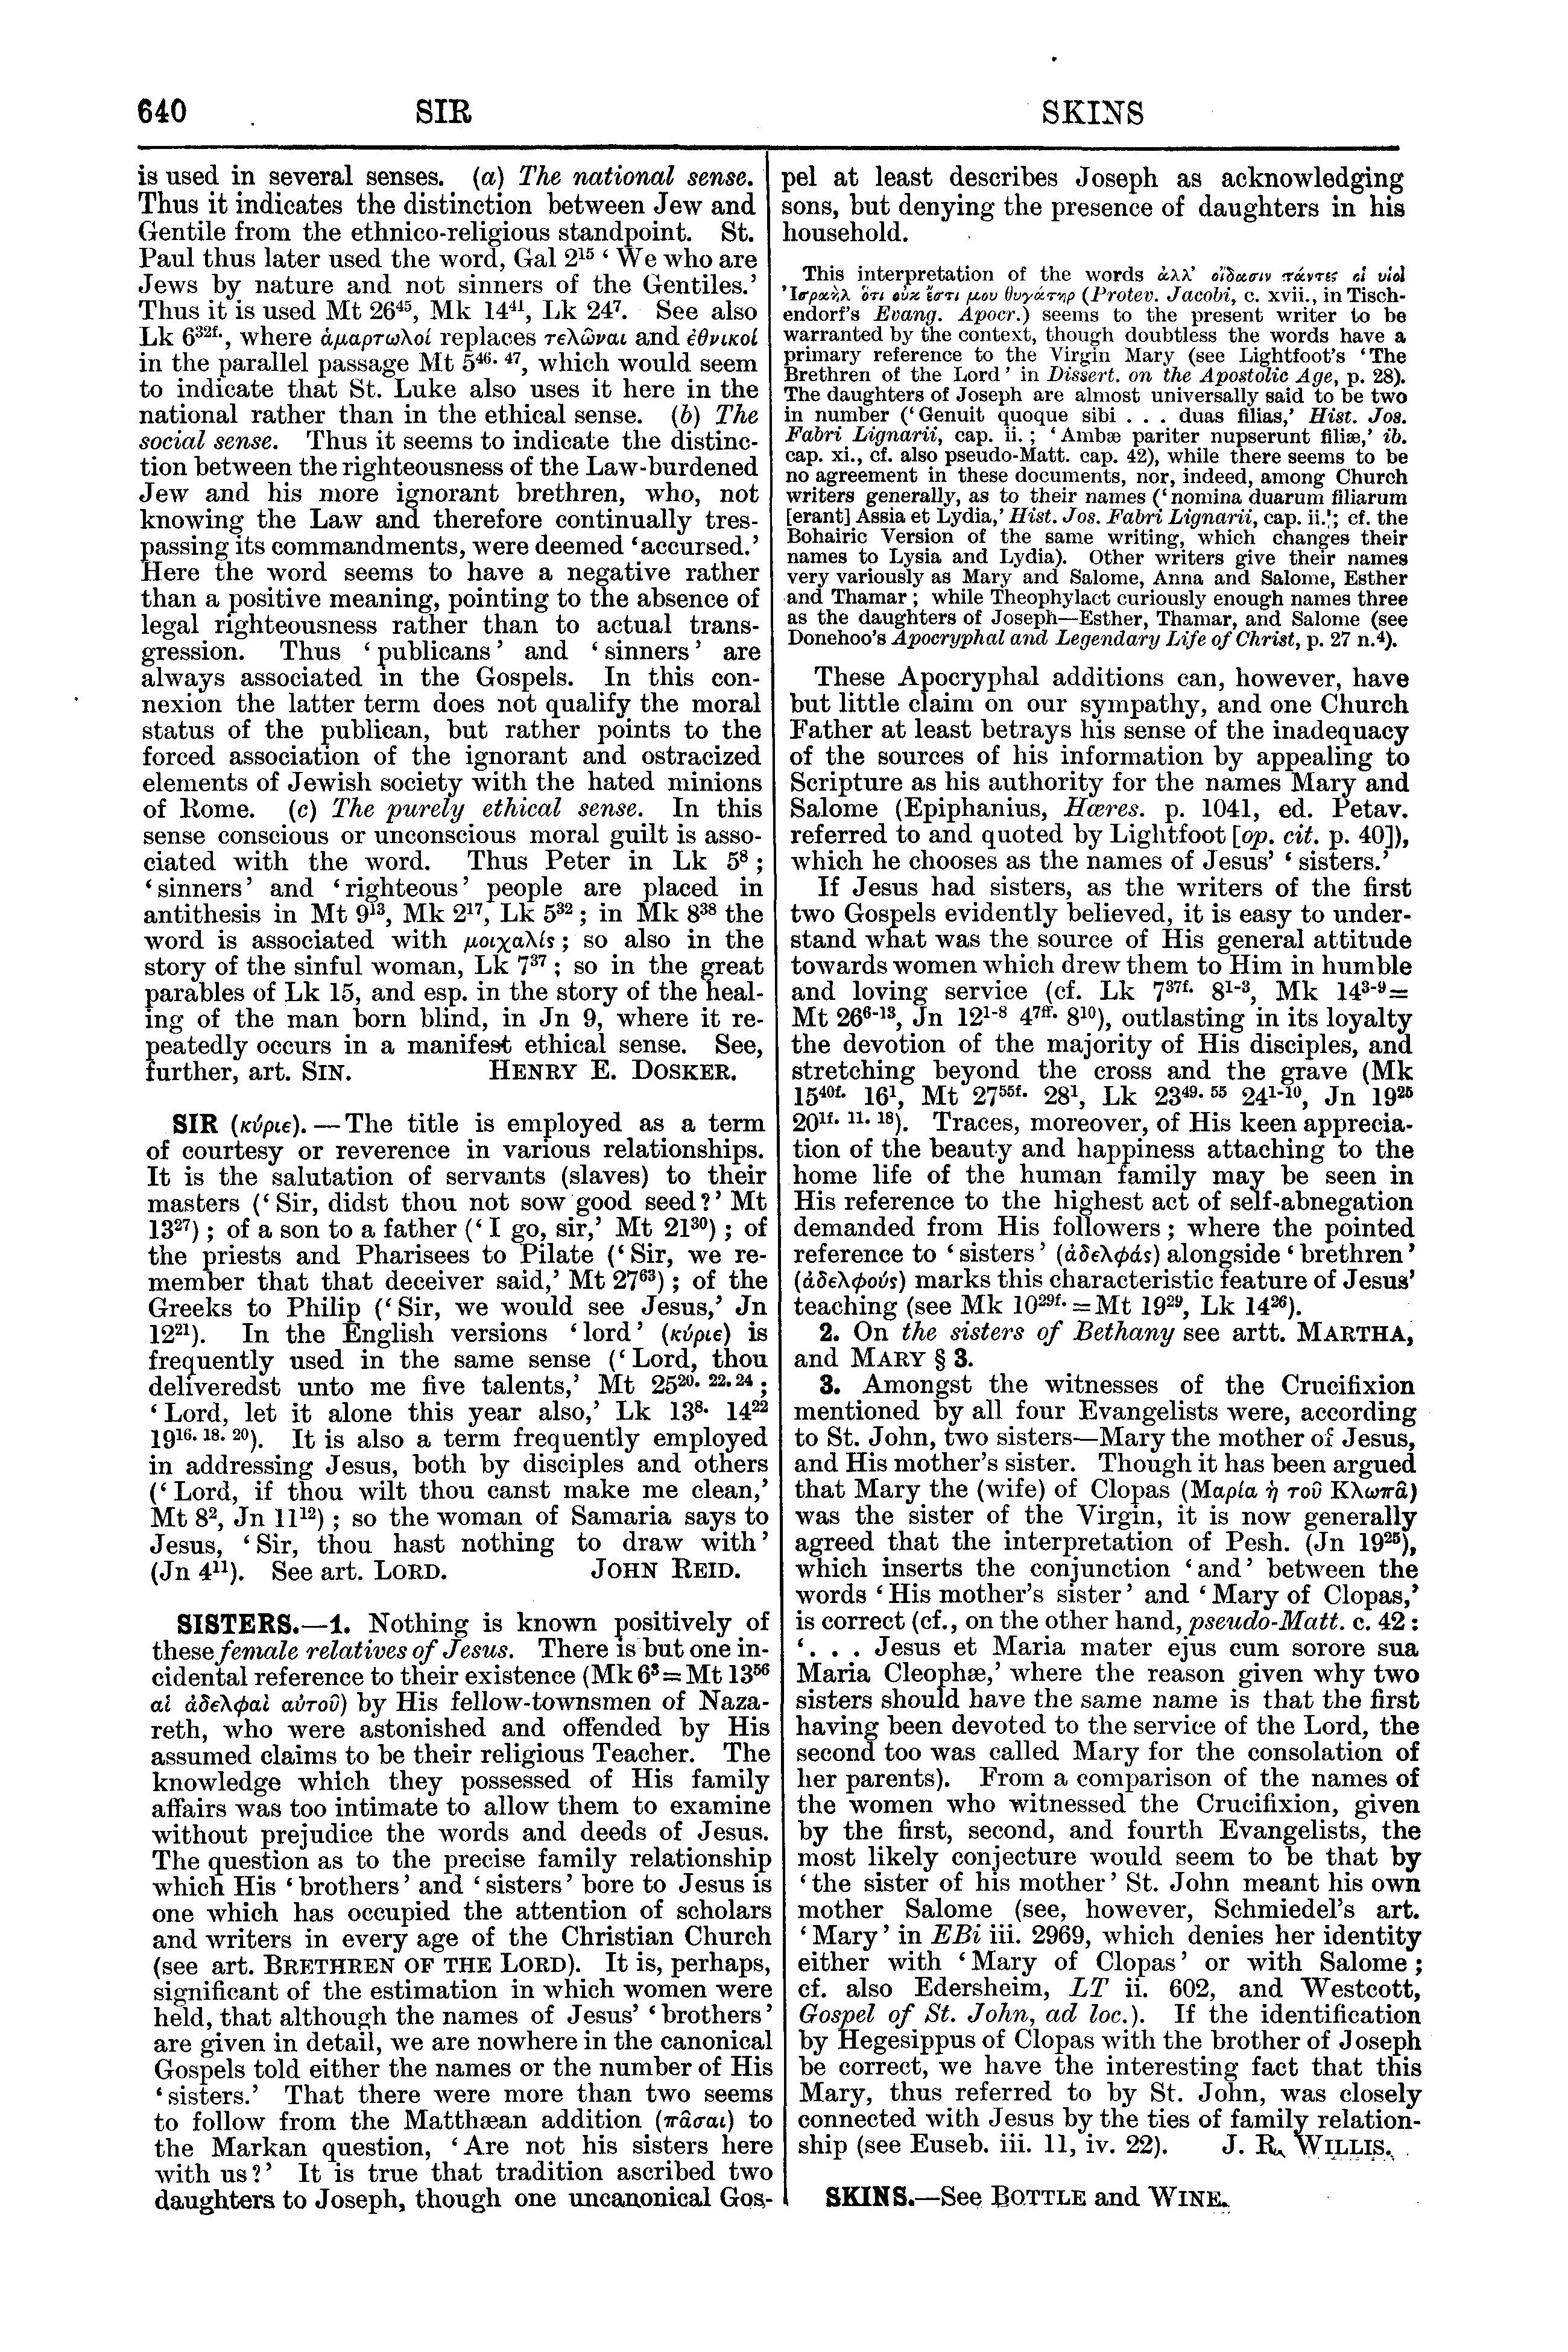 Image of page 640